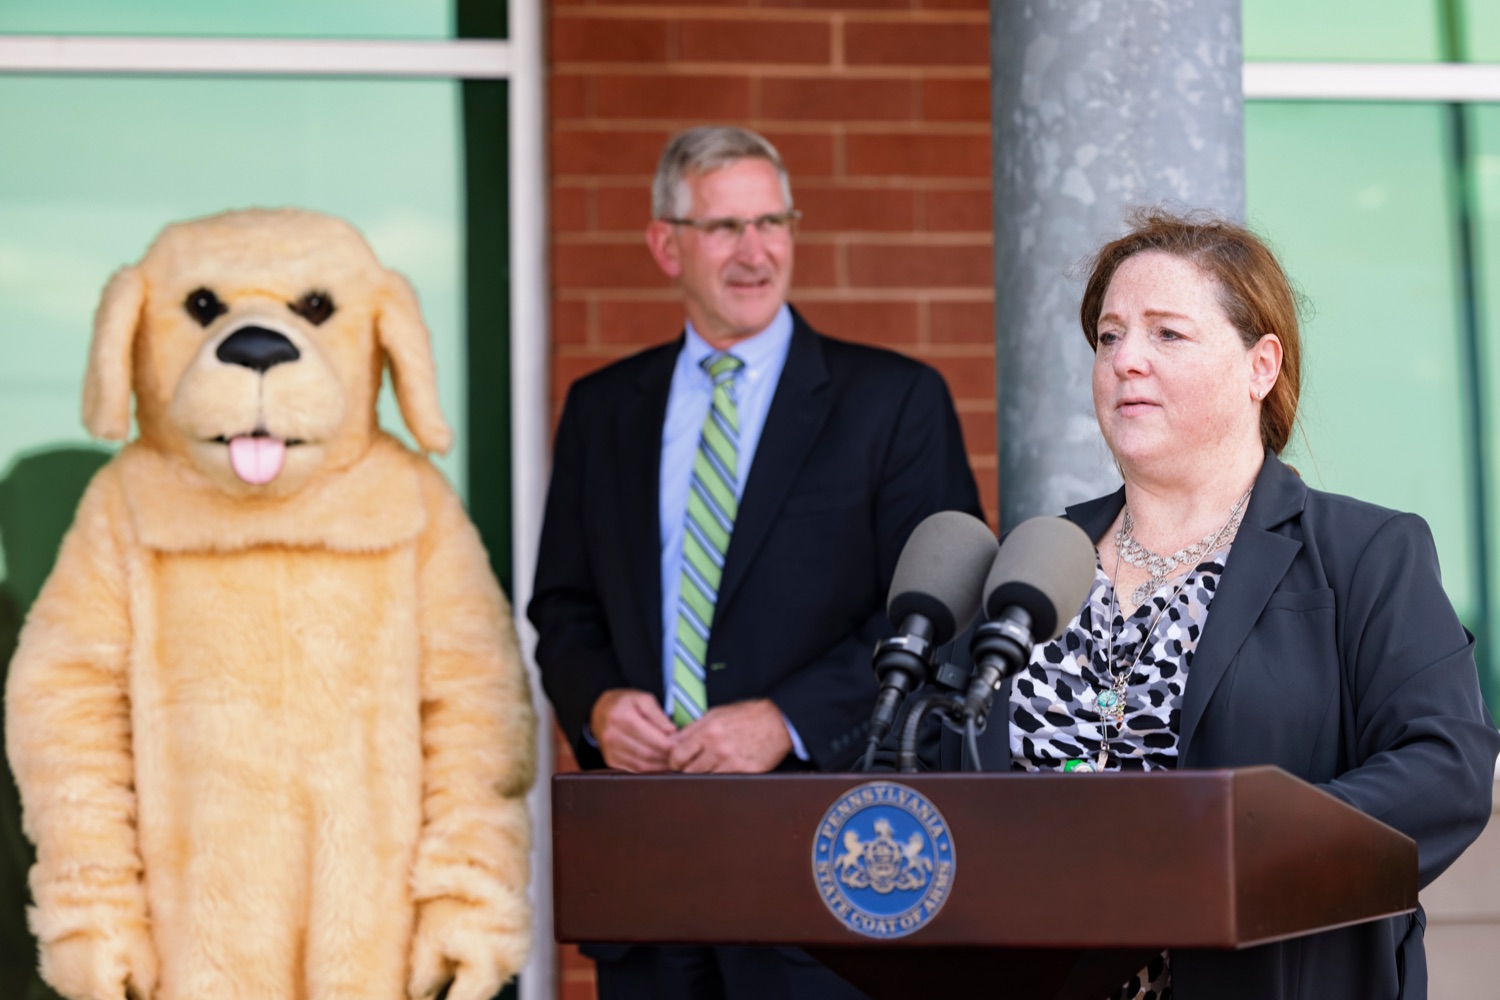 Dr. Andria Saia, executive director of Capital Area Intermediate, speaks during a press conference, which highlighted the success of Pennsylvania's farm to school programs, at Hill Top Academy in Mechanicsburg on Friday, August 27, 2021.<br><a href="https://filesource.amperwave.net/commonwealthofpa/photo/19054_AGRIC_FarmToSchool_NK_012.jpg" target="_blank">⇣ Download Photo</a>